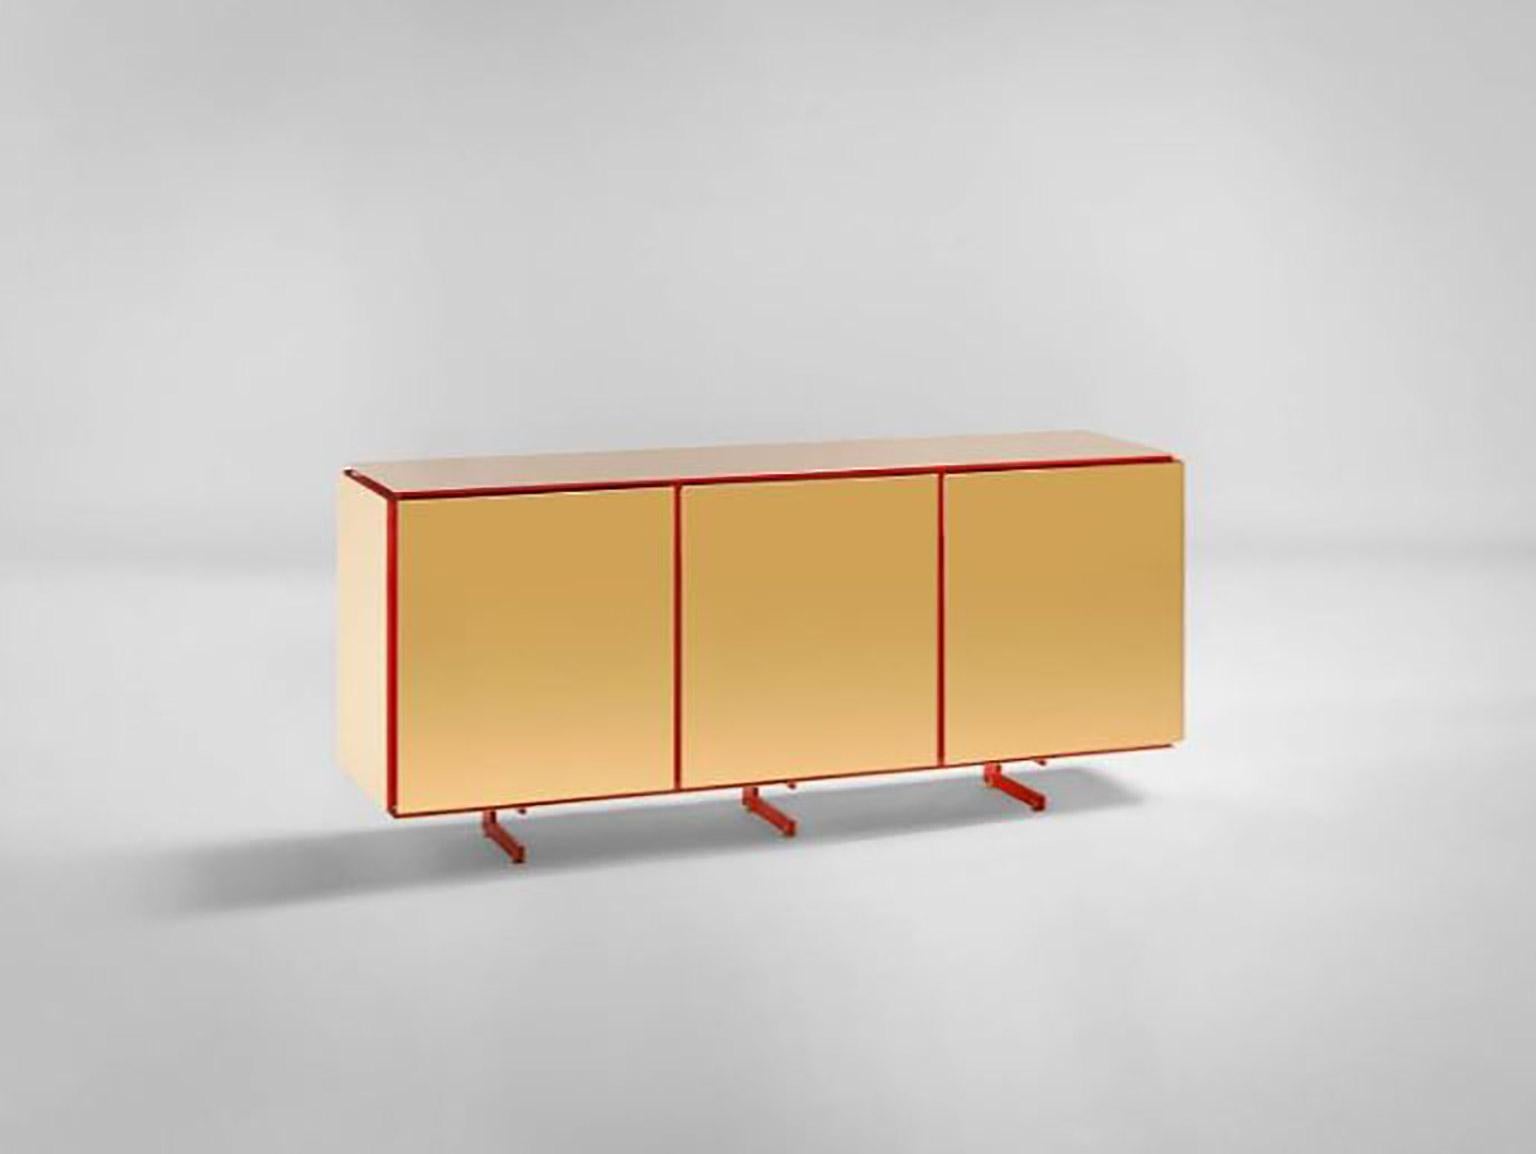 SEM Gold collection, three doors sideboard. Corallo lacquered wooden structure, gloss finish. Available more colorway variants. Plated external shell in 24-karat polished yellow gold combined with ultra-reflective steel. The Gold collection has a